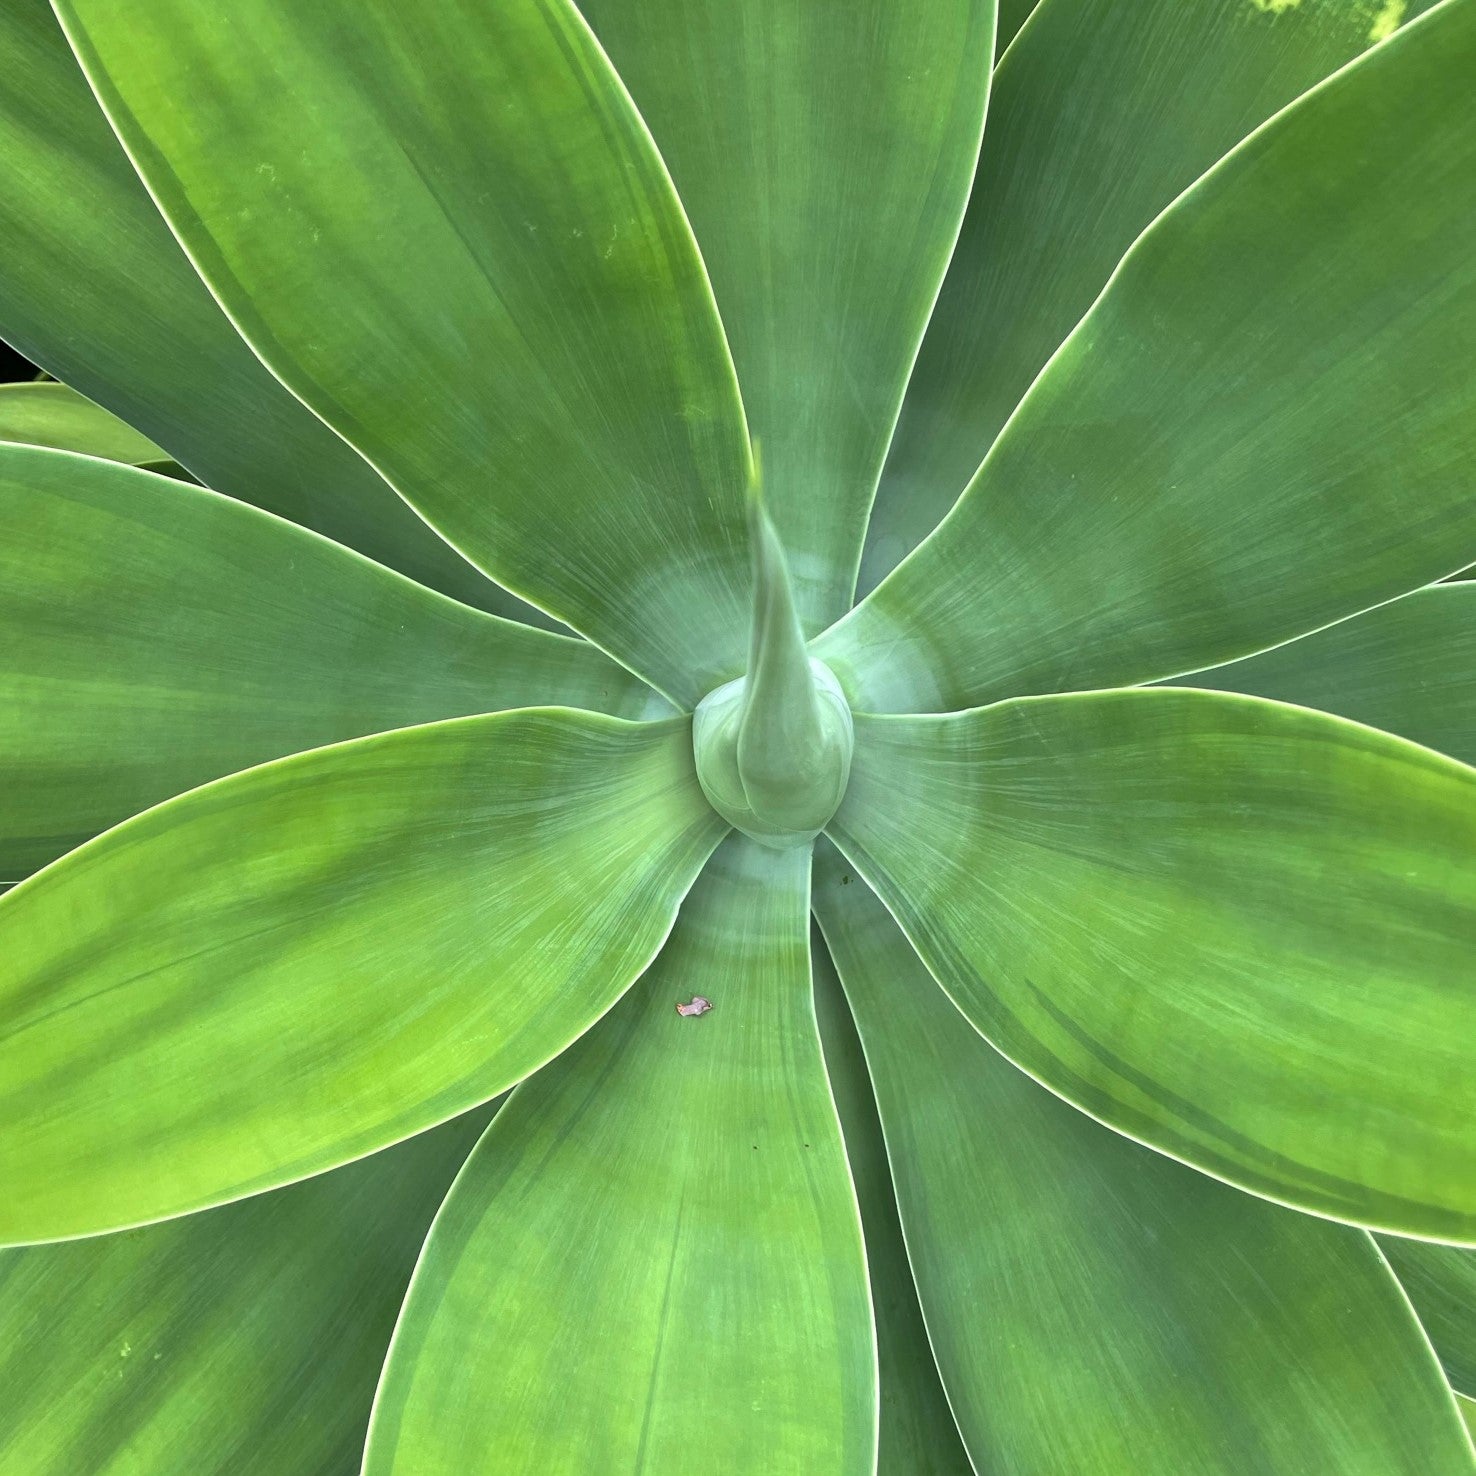 Agave attenuata - Foxtail Agave, Swan's Neck Agave